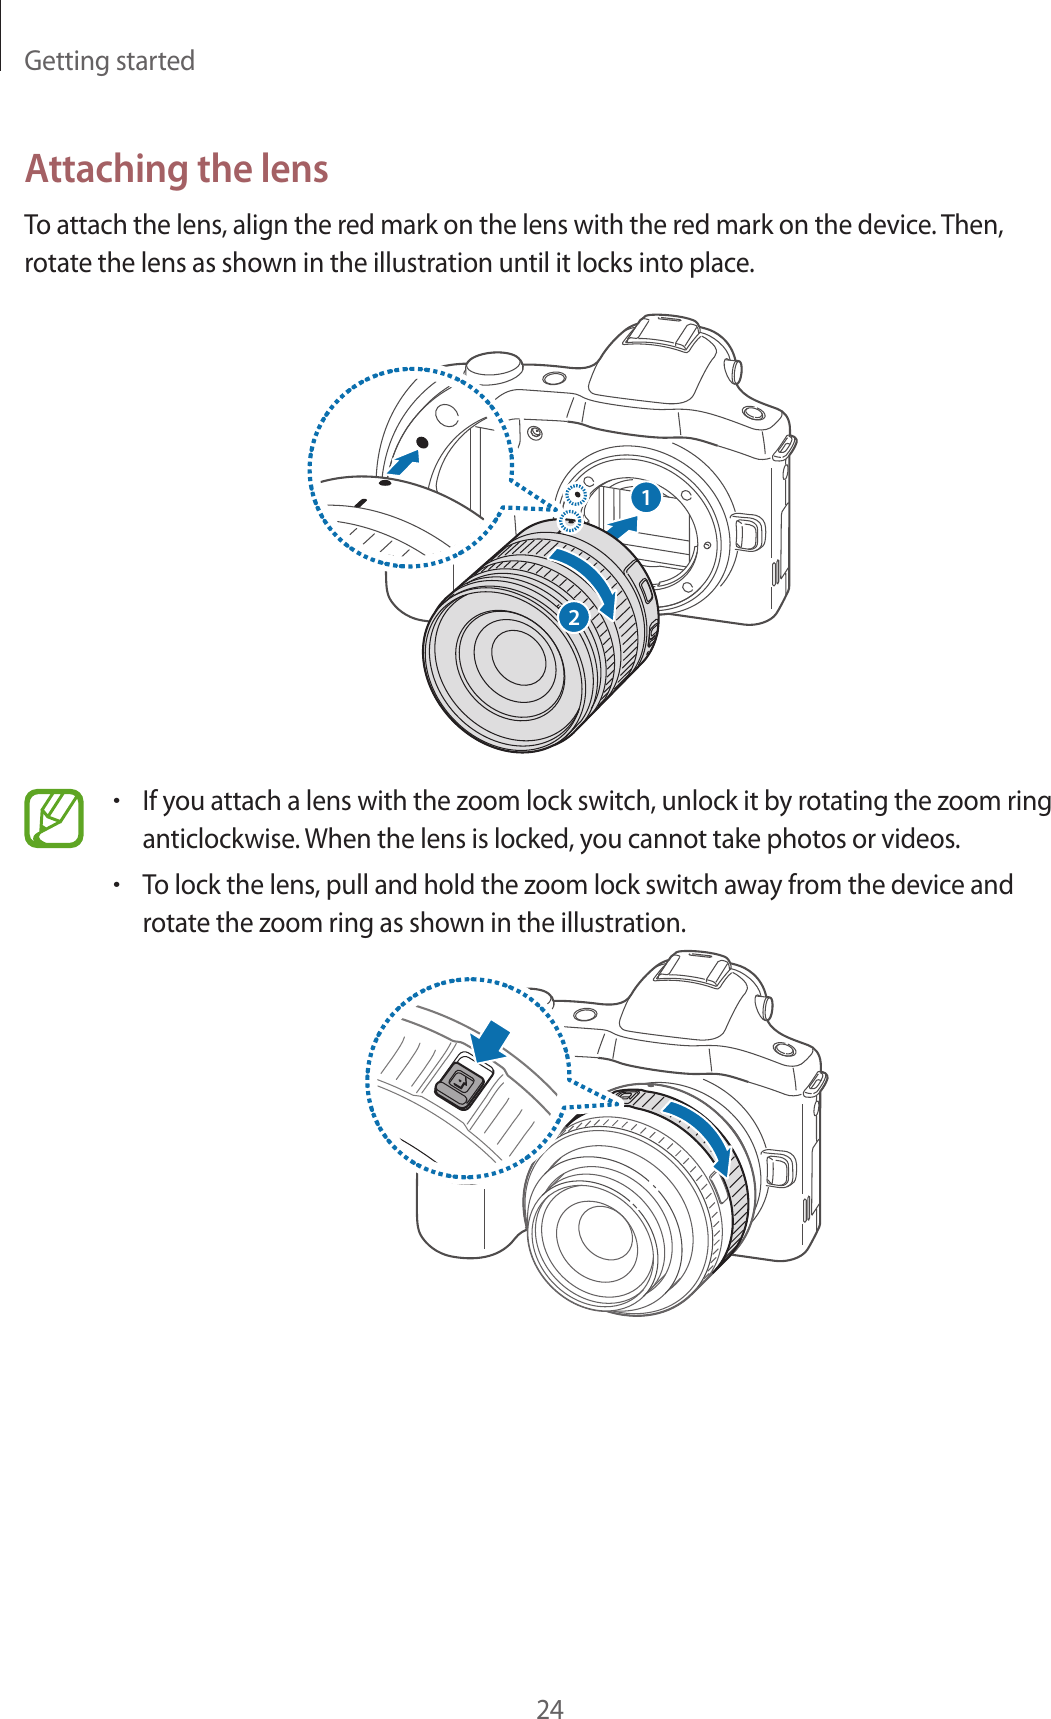 Getting started24Attaching the lensTo attach the lens, align the red mark on the lens with the red mark on the device. Then, rotate the lens as shown in the illustration until it locks into place.21•If you attach a lens with the zoom lock switch, unlock it by rotating the zoom ring anticlockwise. When the lens is locked, you cannot take photos or videos.•To lock the lens, pull and hold the zoom lock switch away from the device and rotate the zoom ring as shown in the illustration.